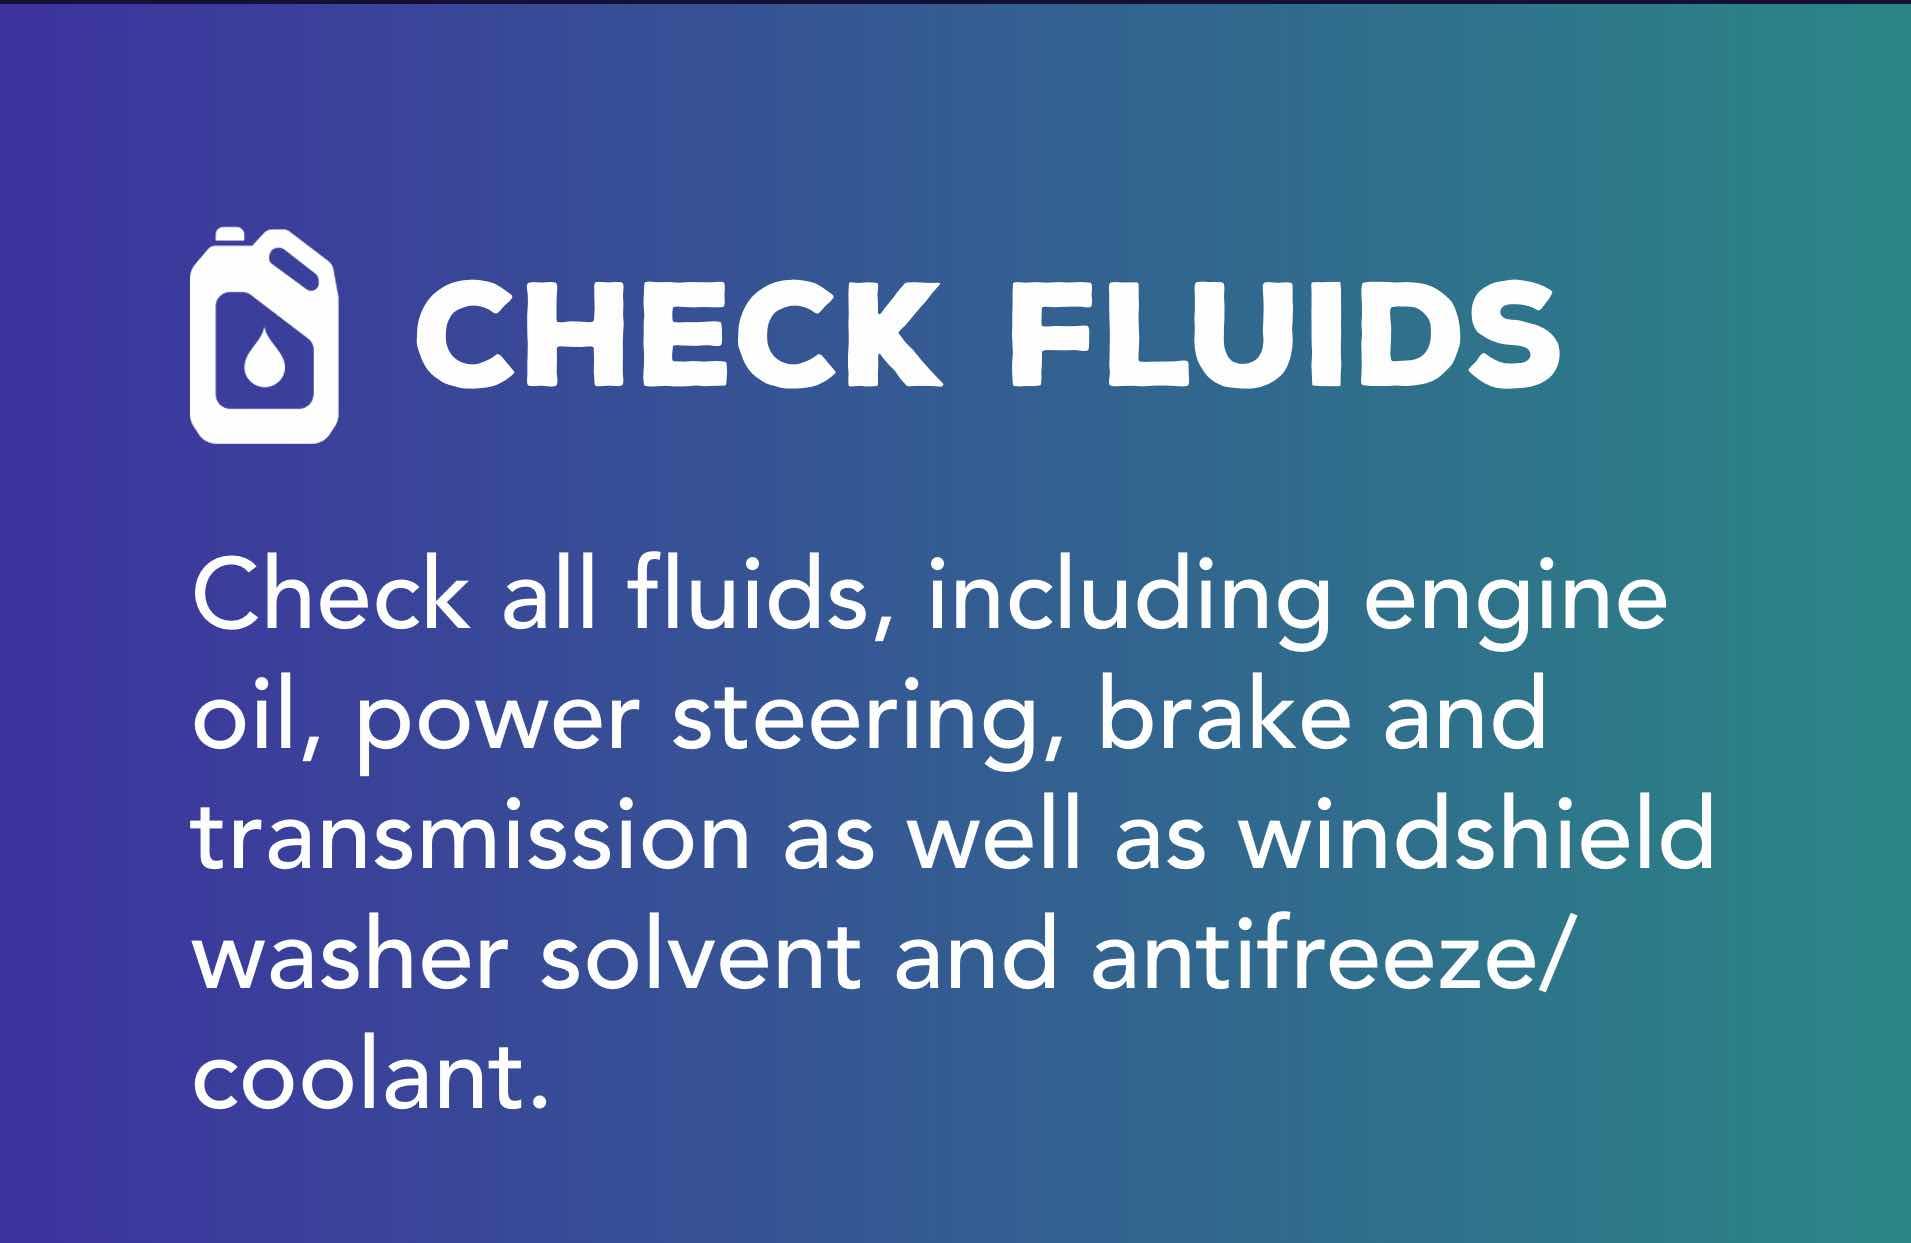 Check all fluids, including engine oil, power steering, brake and transmission as well as windshield washer solvent and antifreeze/coolant.